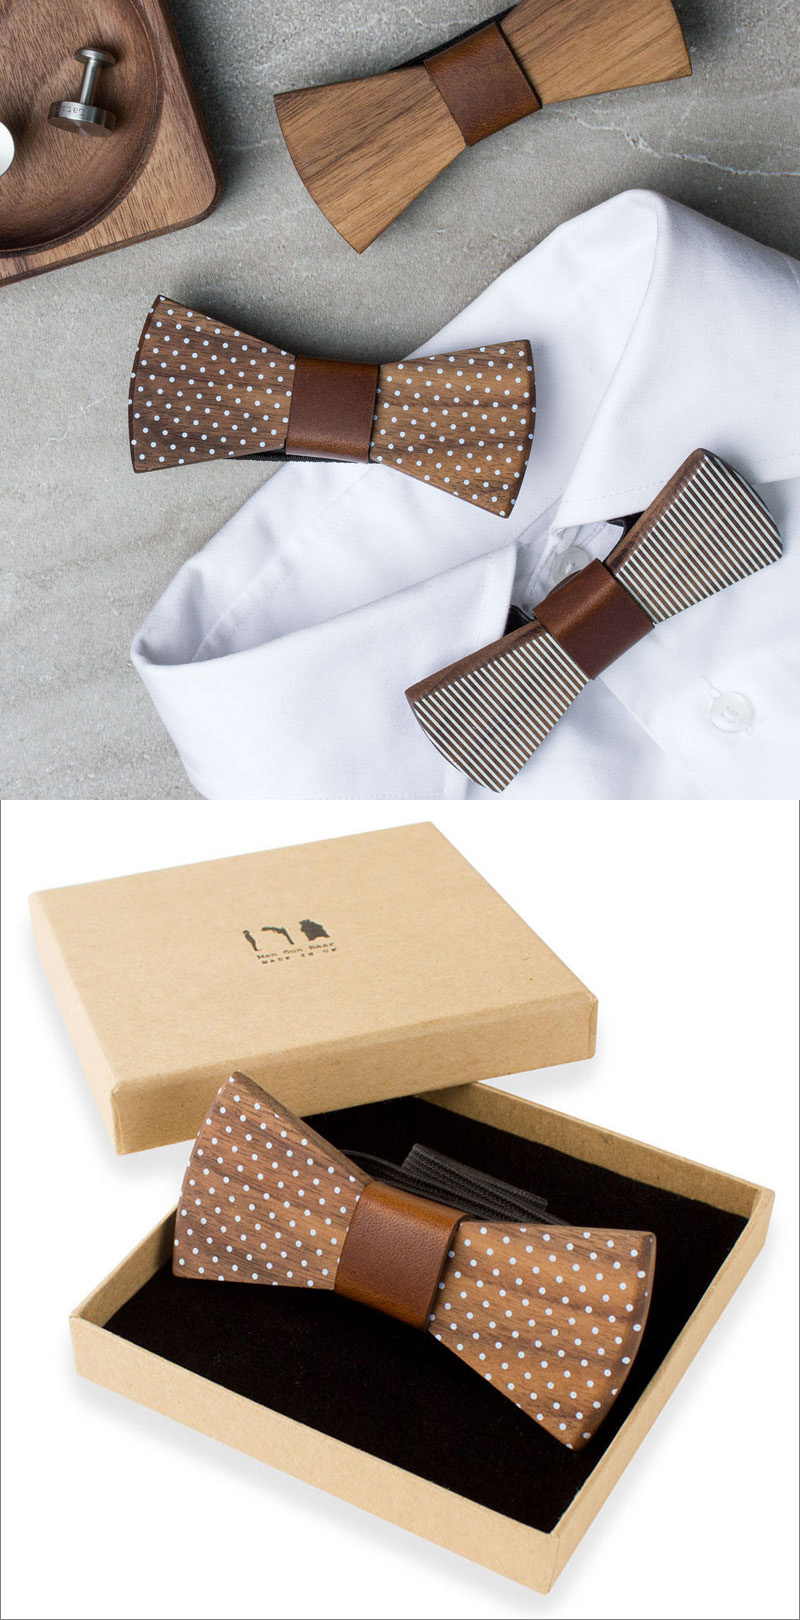  Thick pieces of wood with leather center pieces and simple stripes or polka dots, make these modern bow ties a fun alternative to the traditional kind often worn to formal events.